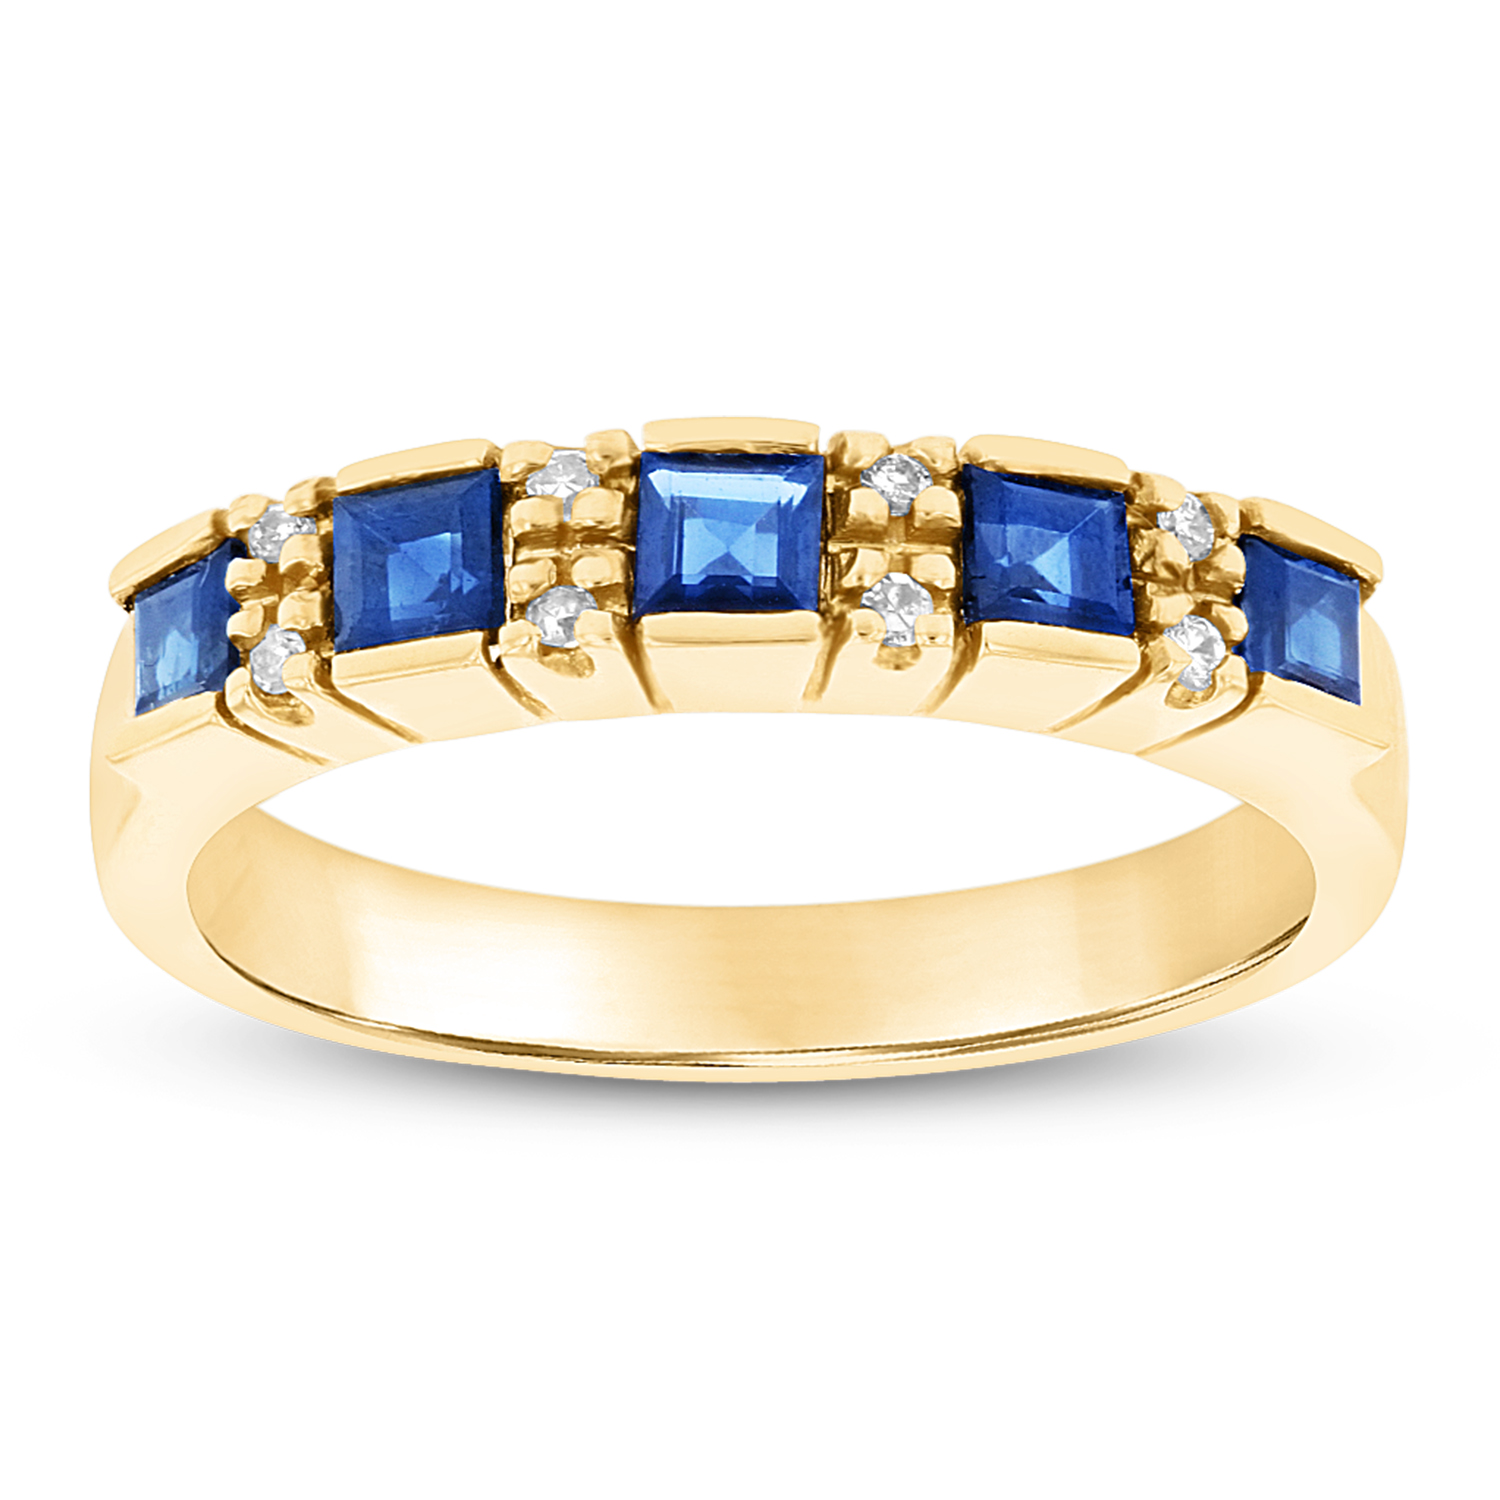 0.05ctw Diamond and Sapphire Wedding Band in 14k Yellow Gold